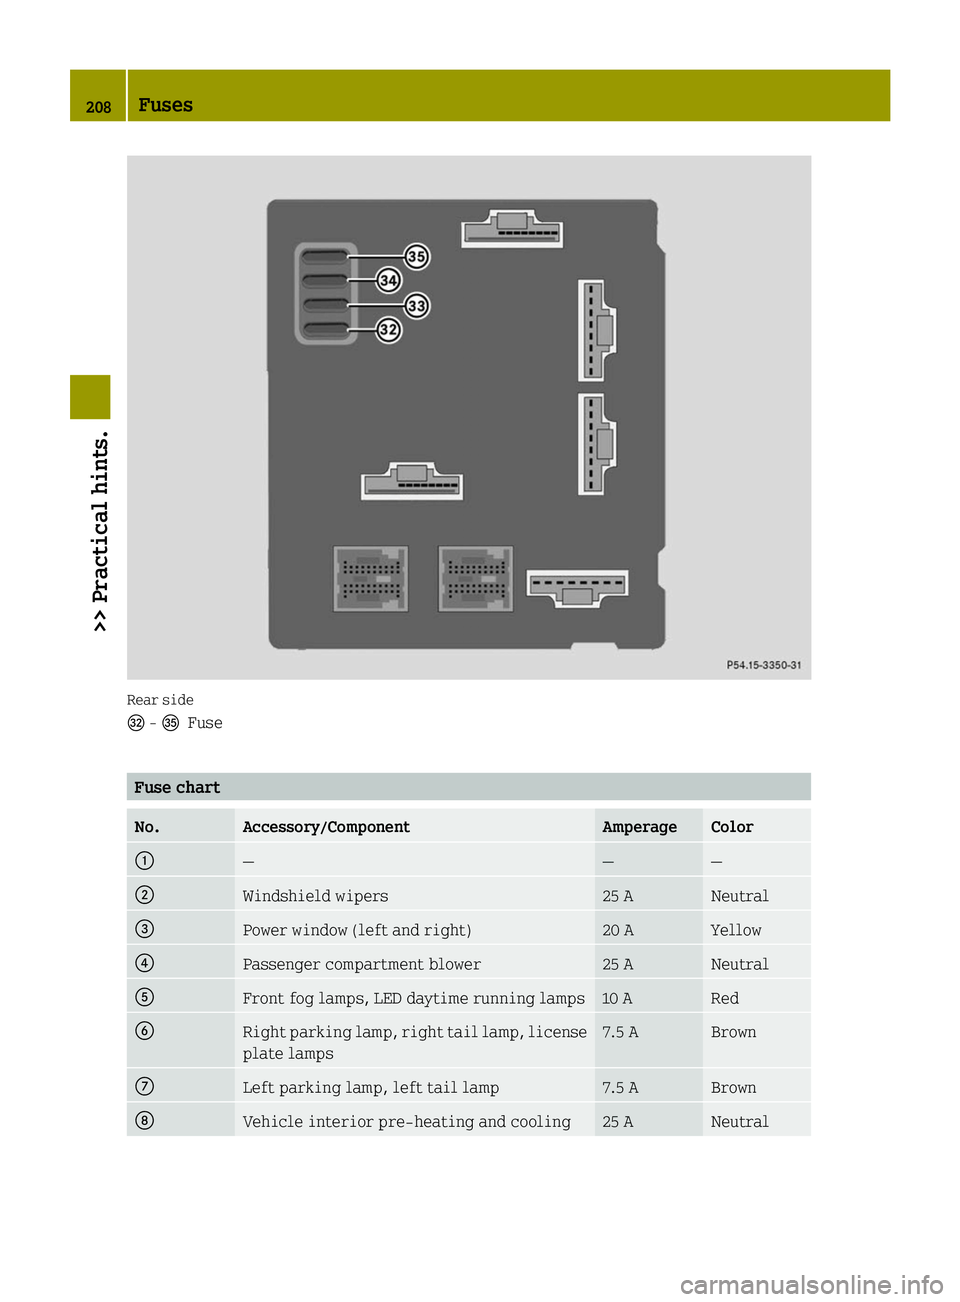 SMART FORTWO COUPE 2014  Owners Manual Rear side
0069
-00B7
Fuse Fuse chart
No. Accessory/Component Amperage Color
0043
— — —
0044
Windshield wipers 25 A Neutral
0087
Power window (left and right) 20 A Yellow
0085
Passenger compartme